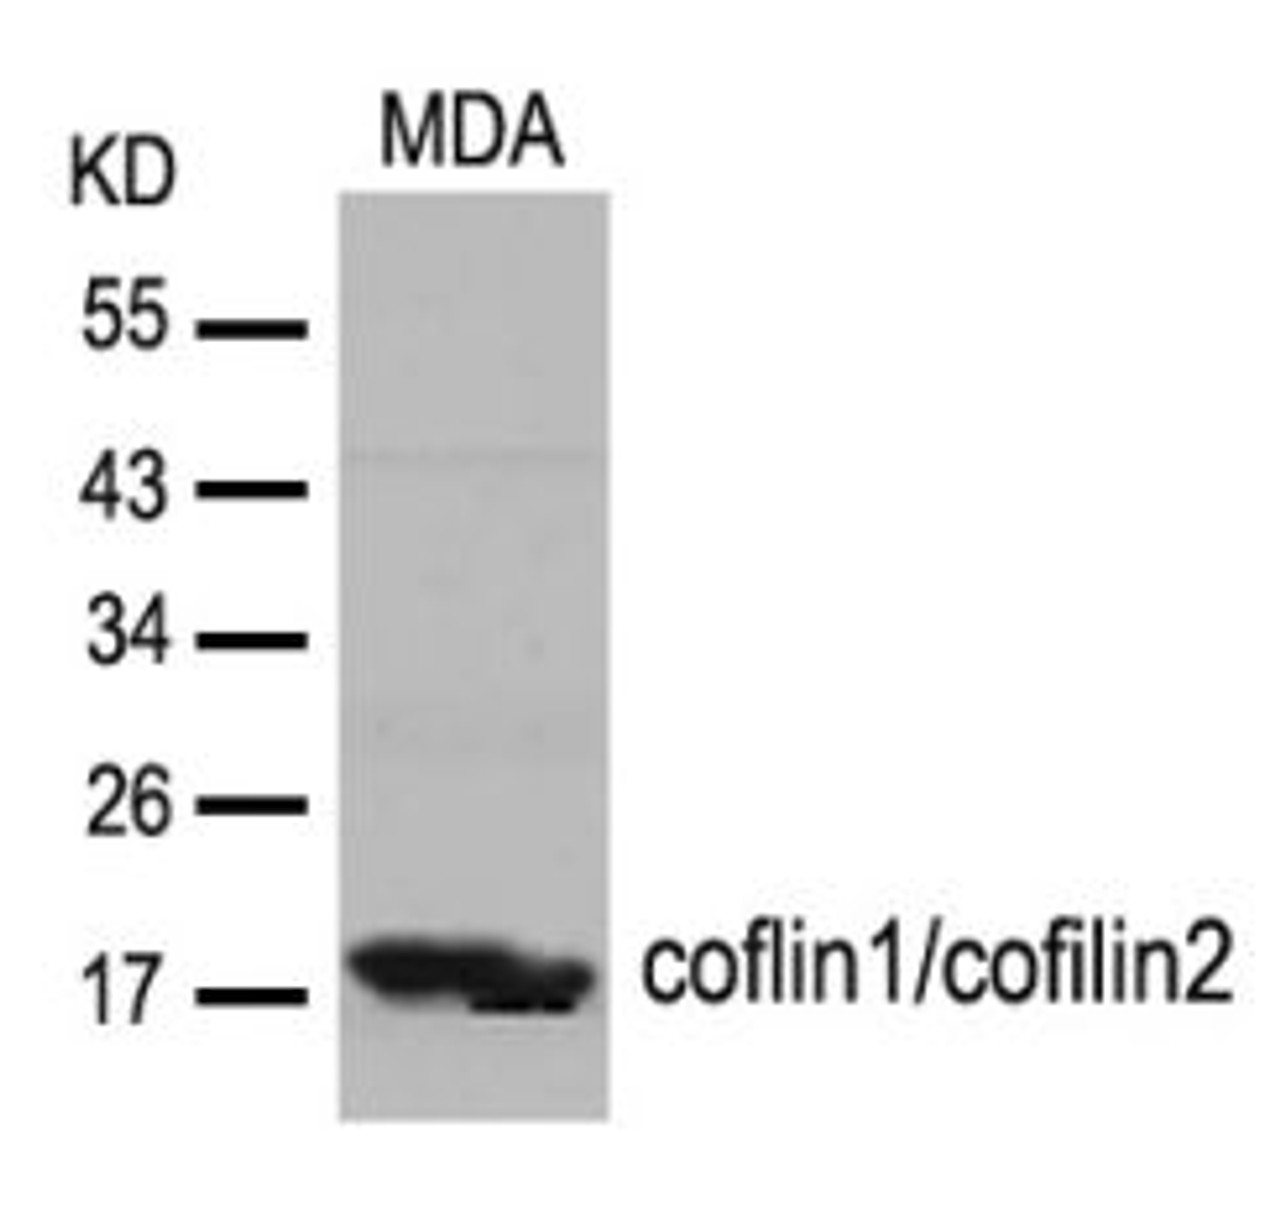 Western blot analysis of lysed extracts from MDA cells using coflin1/cofilin2 (Ab-88) .